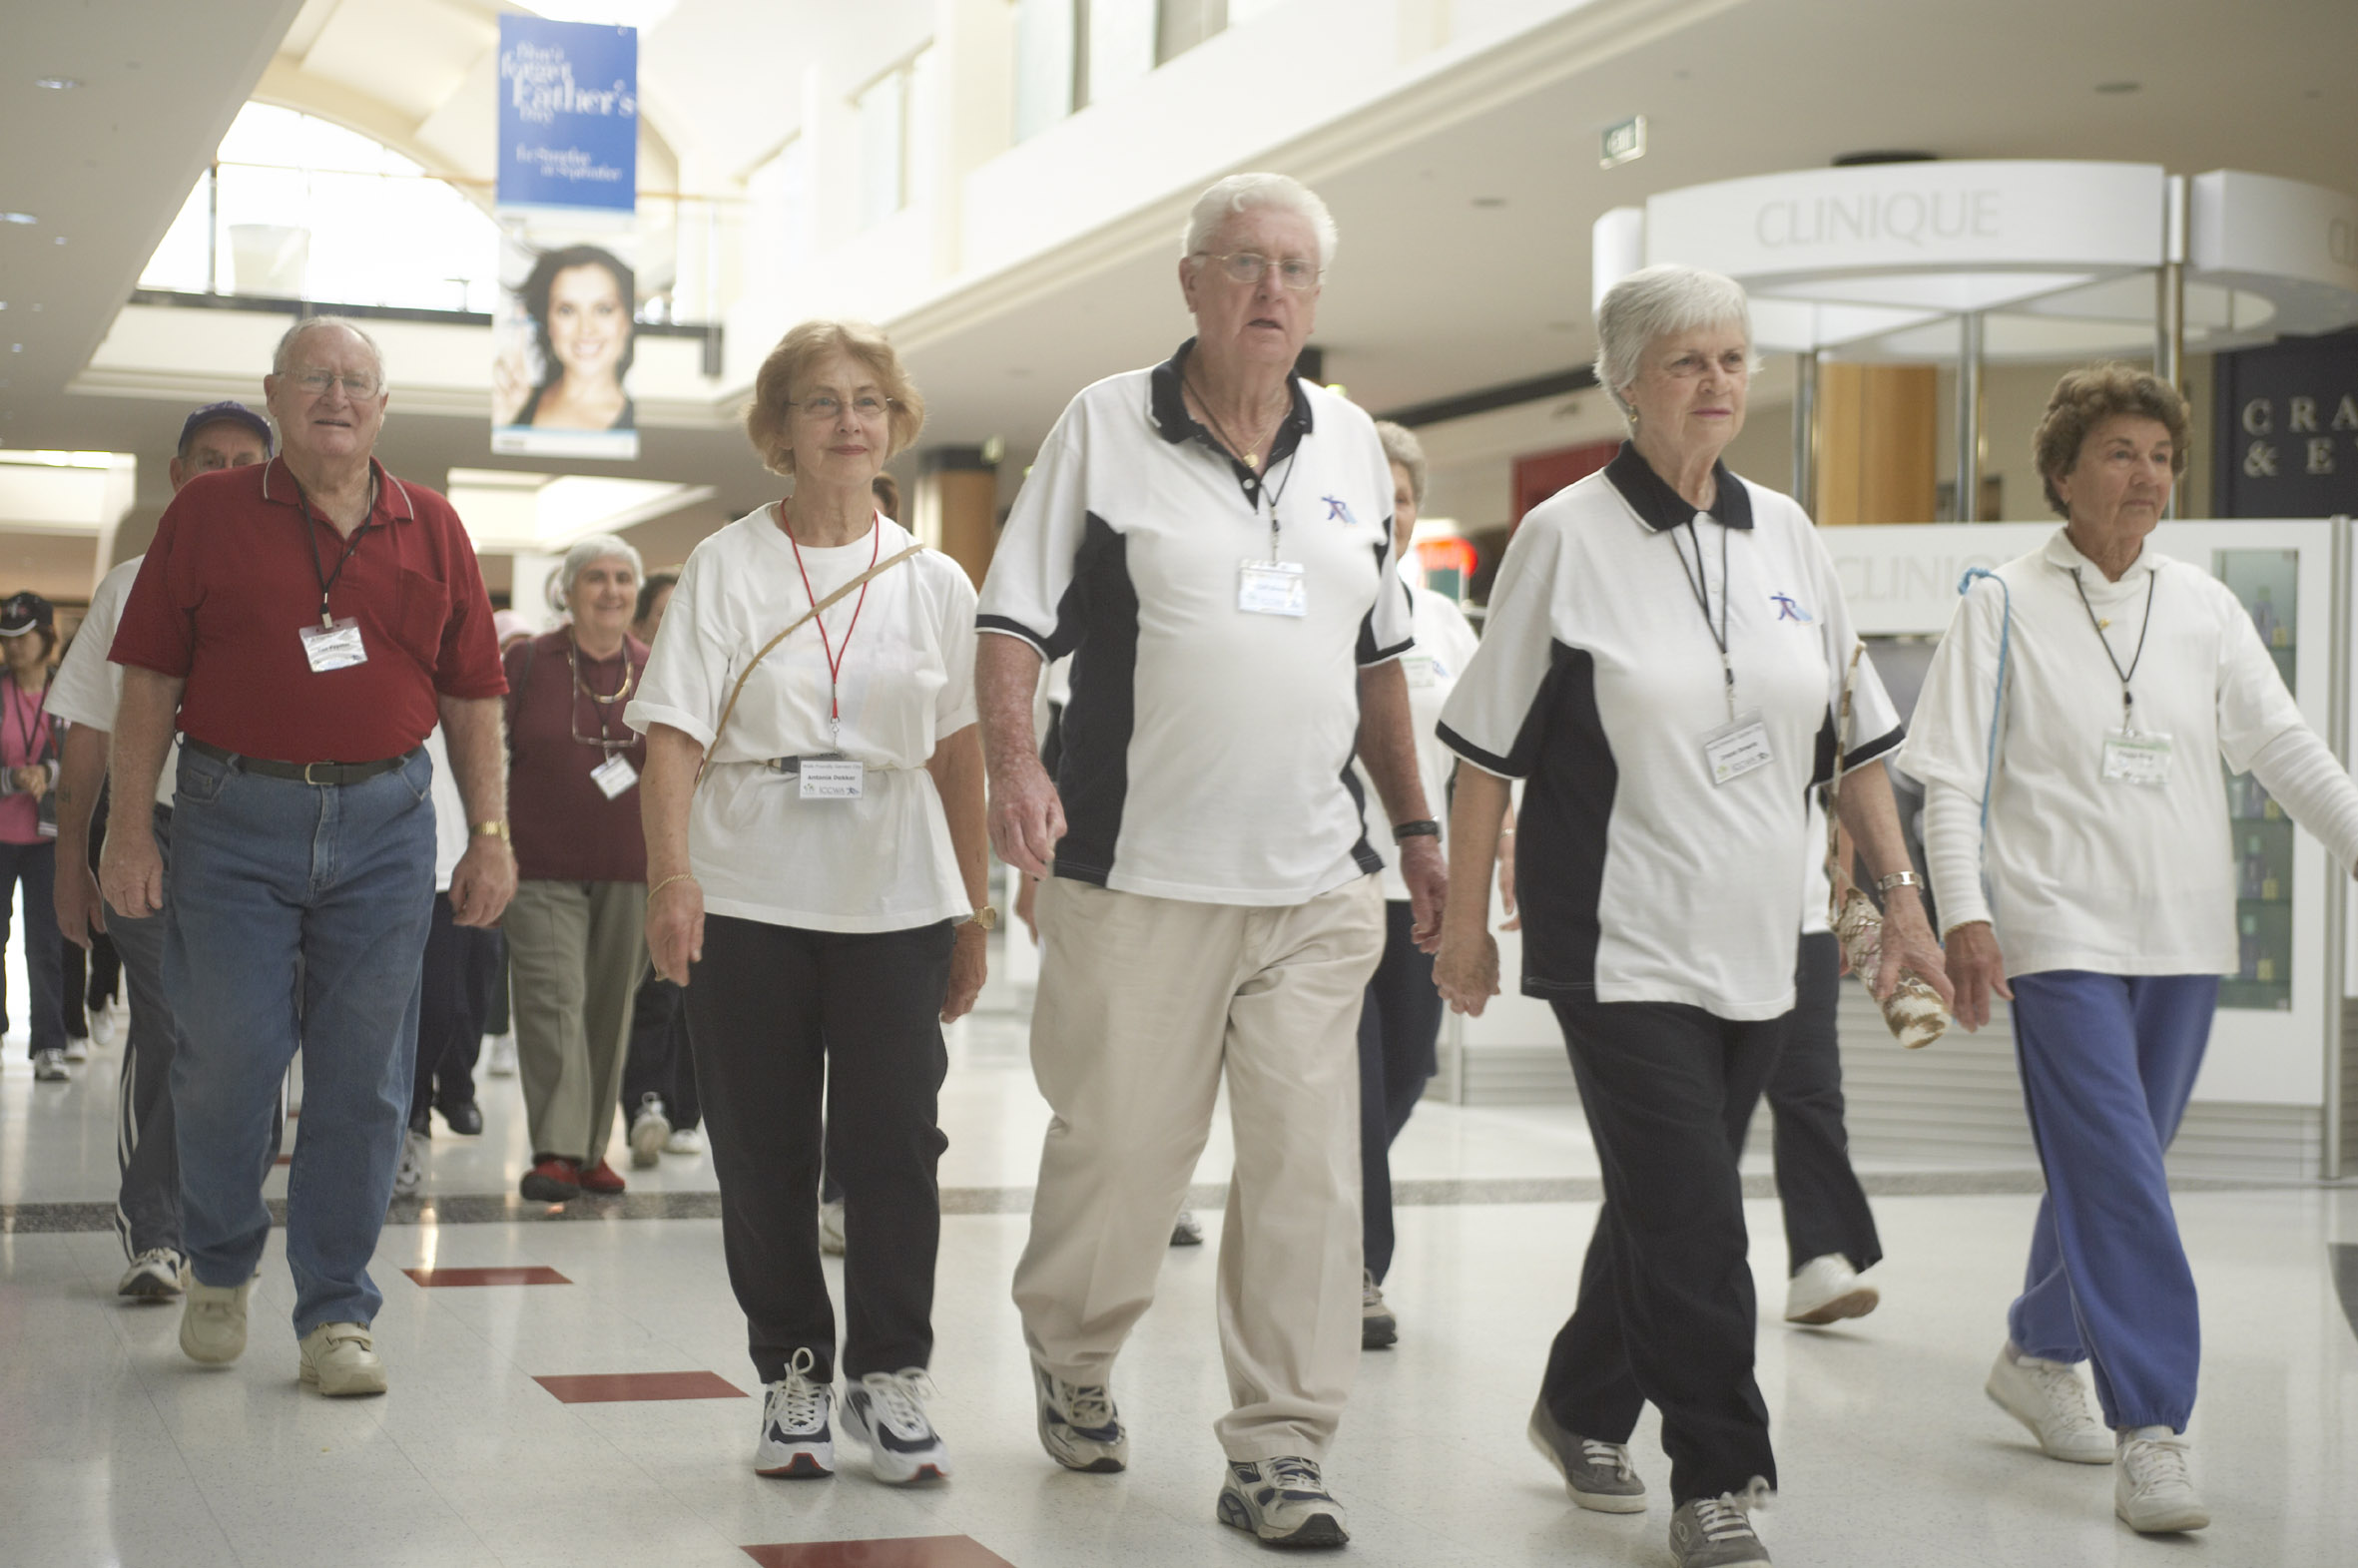 Mall Walkers Google image from http://www.iccwa.org.au/iccwahome/Seniors%20Photo's%20024.jpg